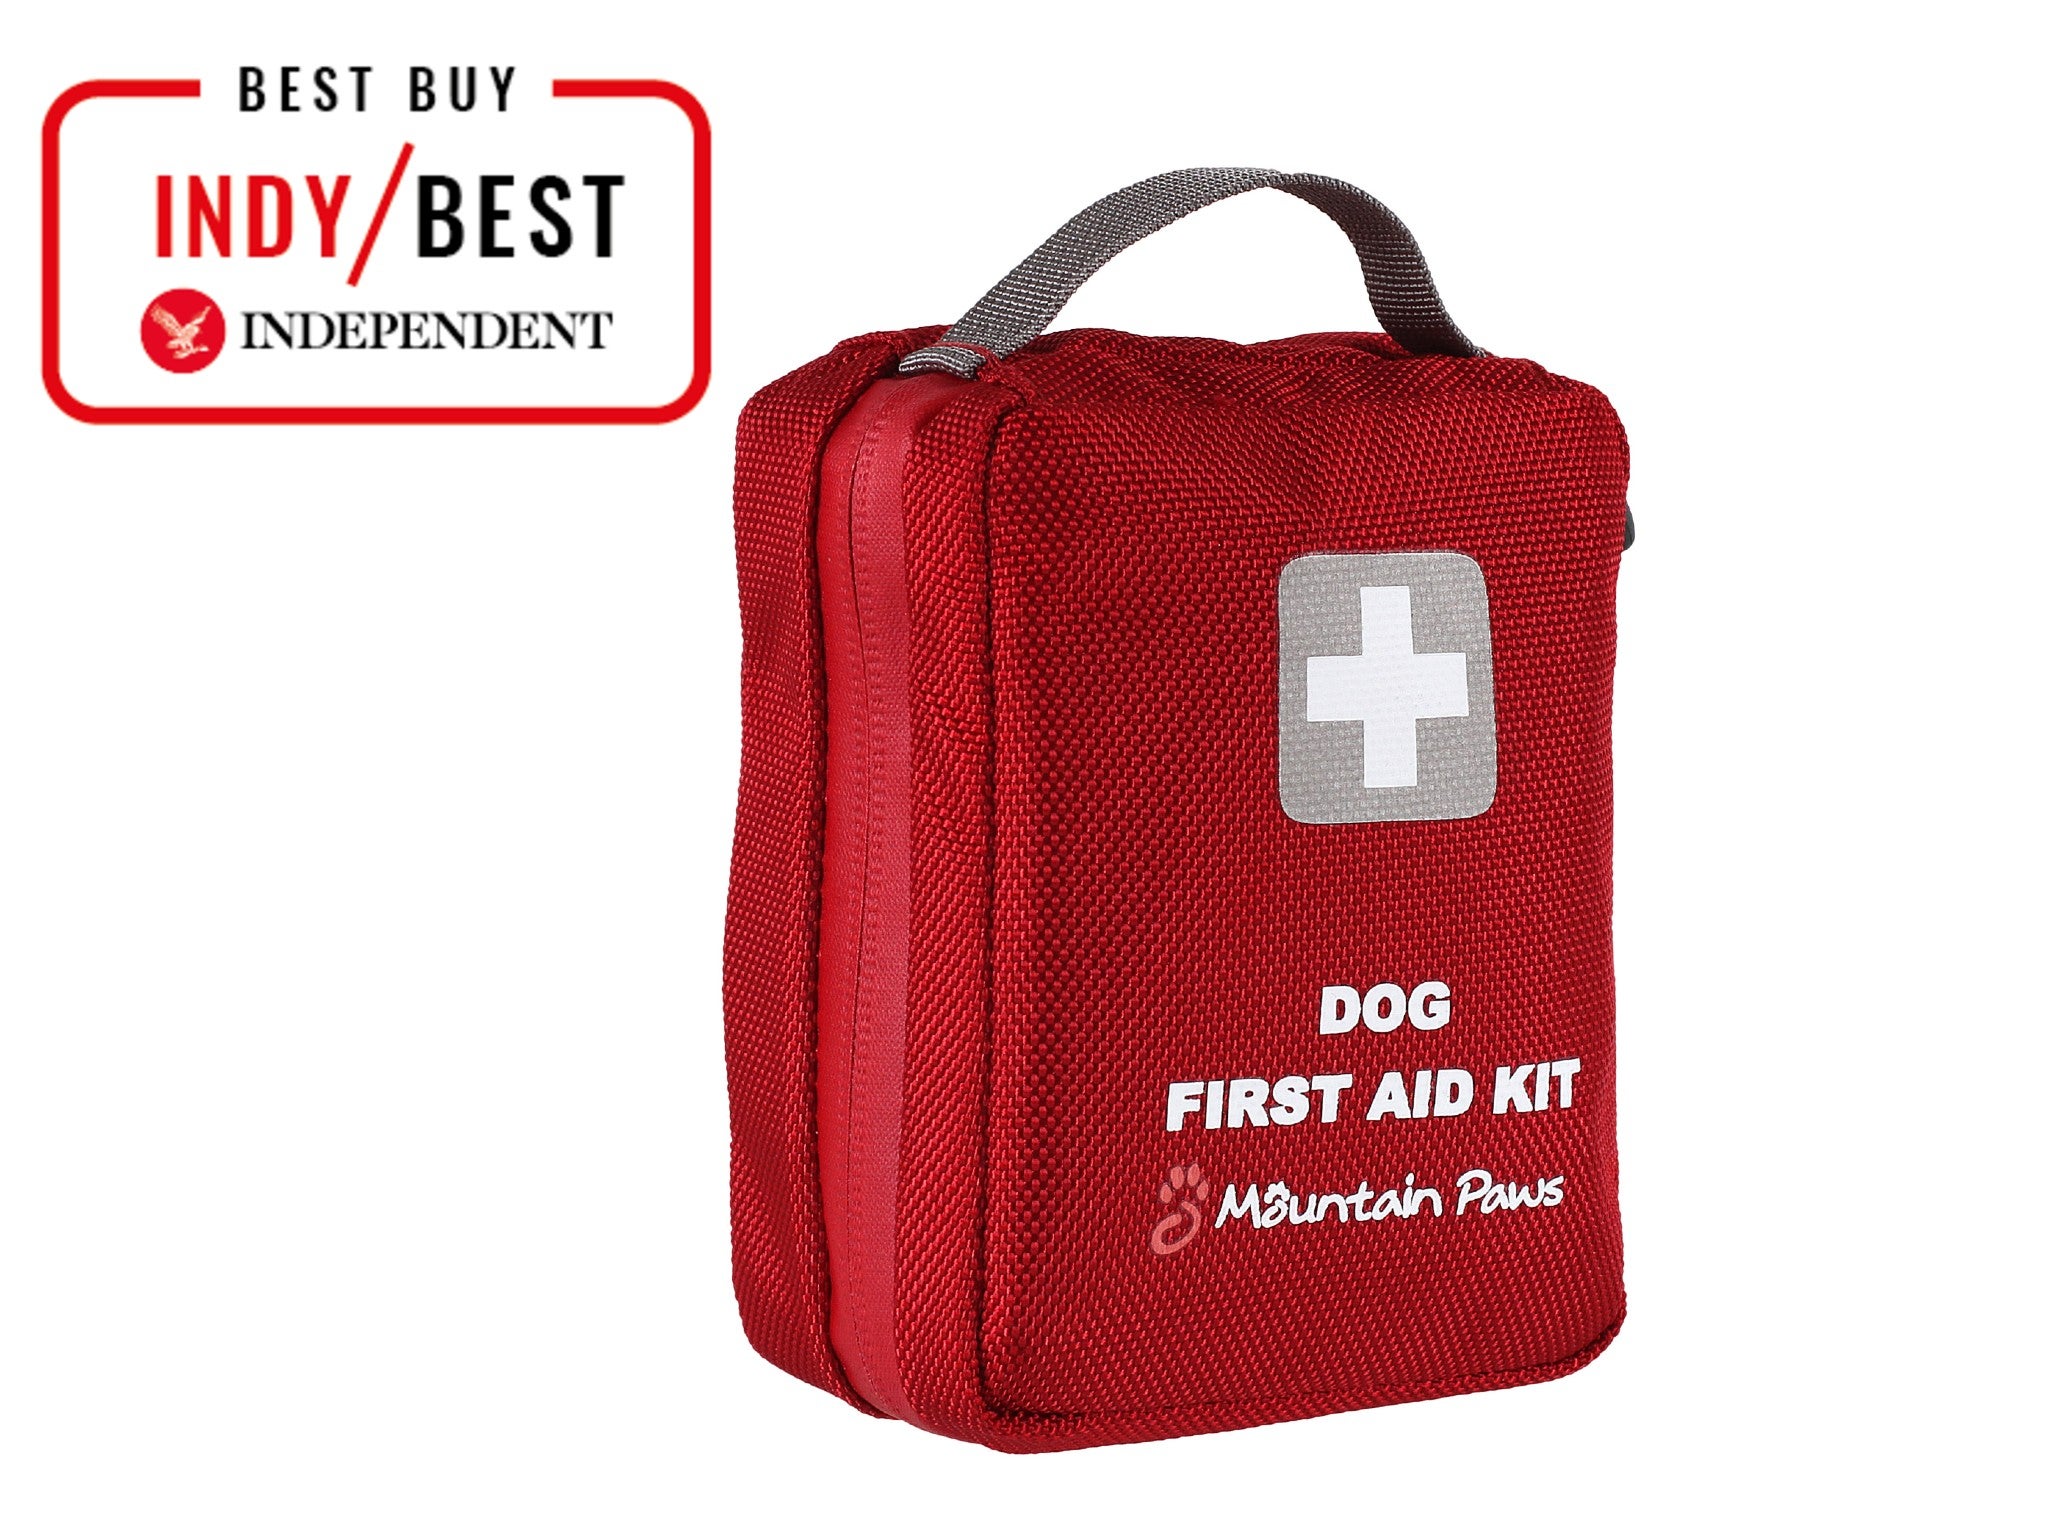 Mountain Paws Dog First Aid Kit indybest.jpg